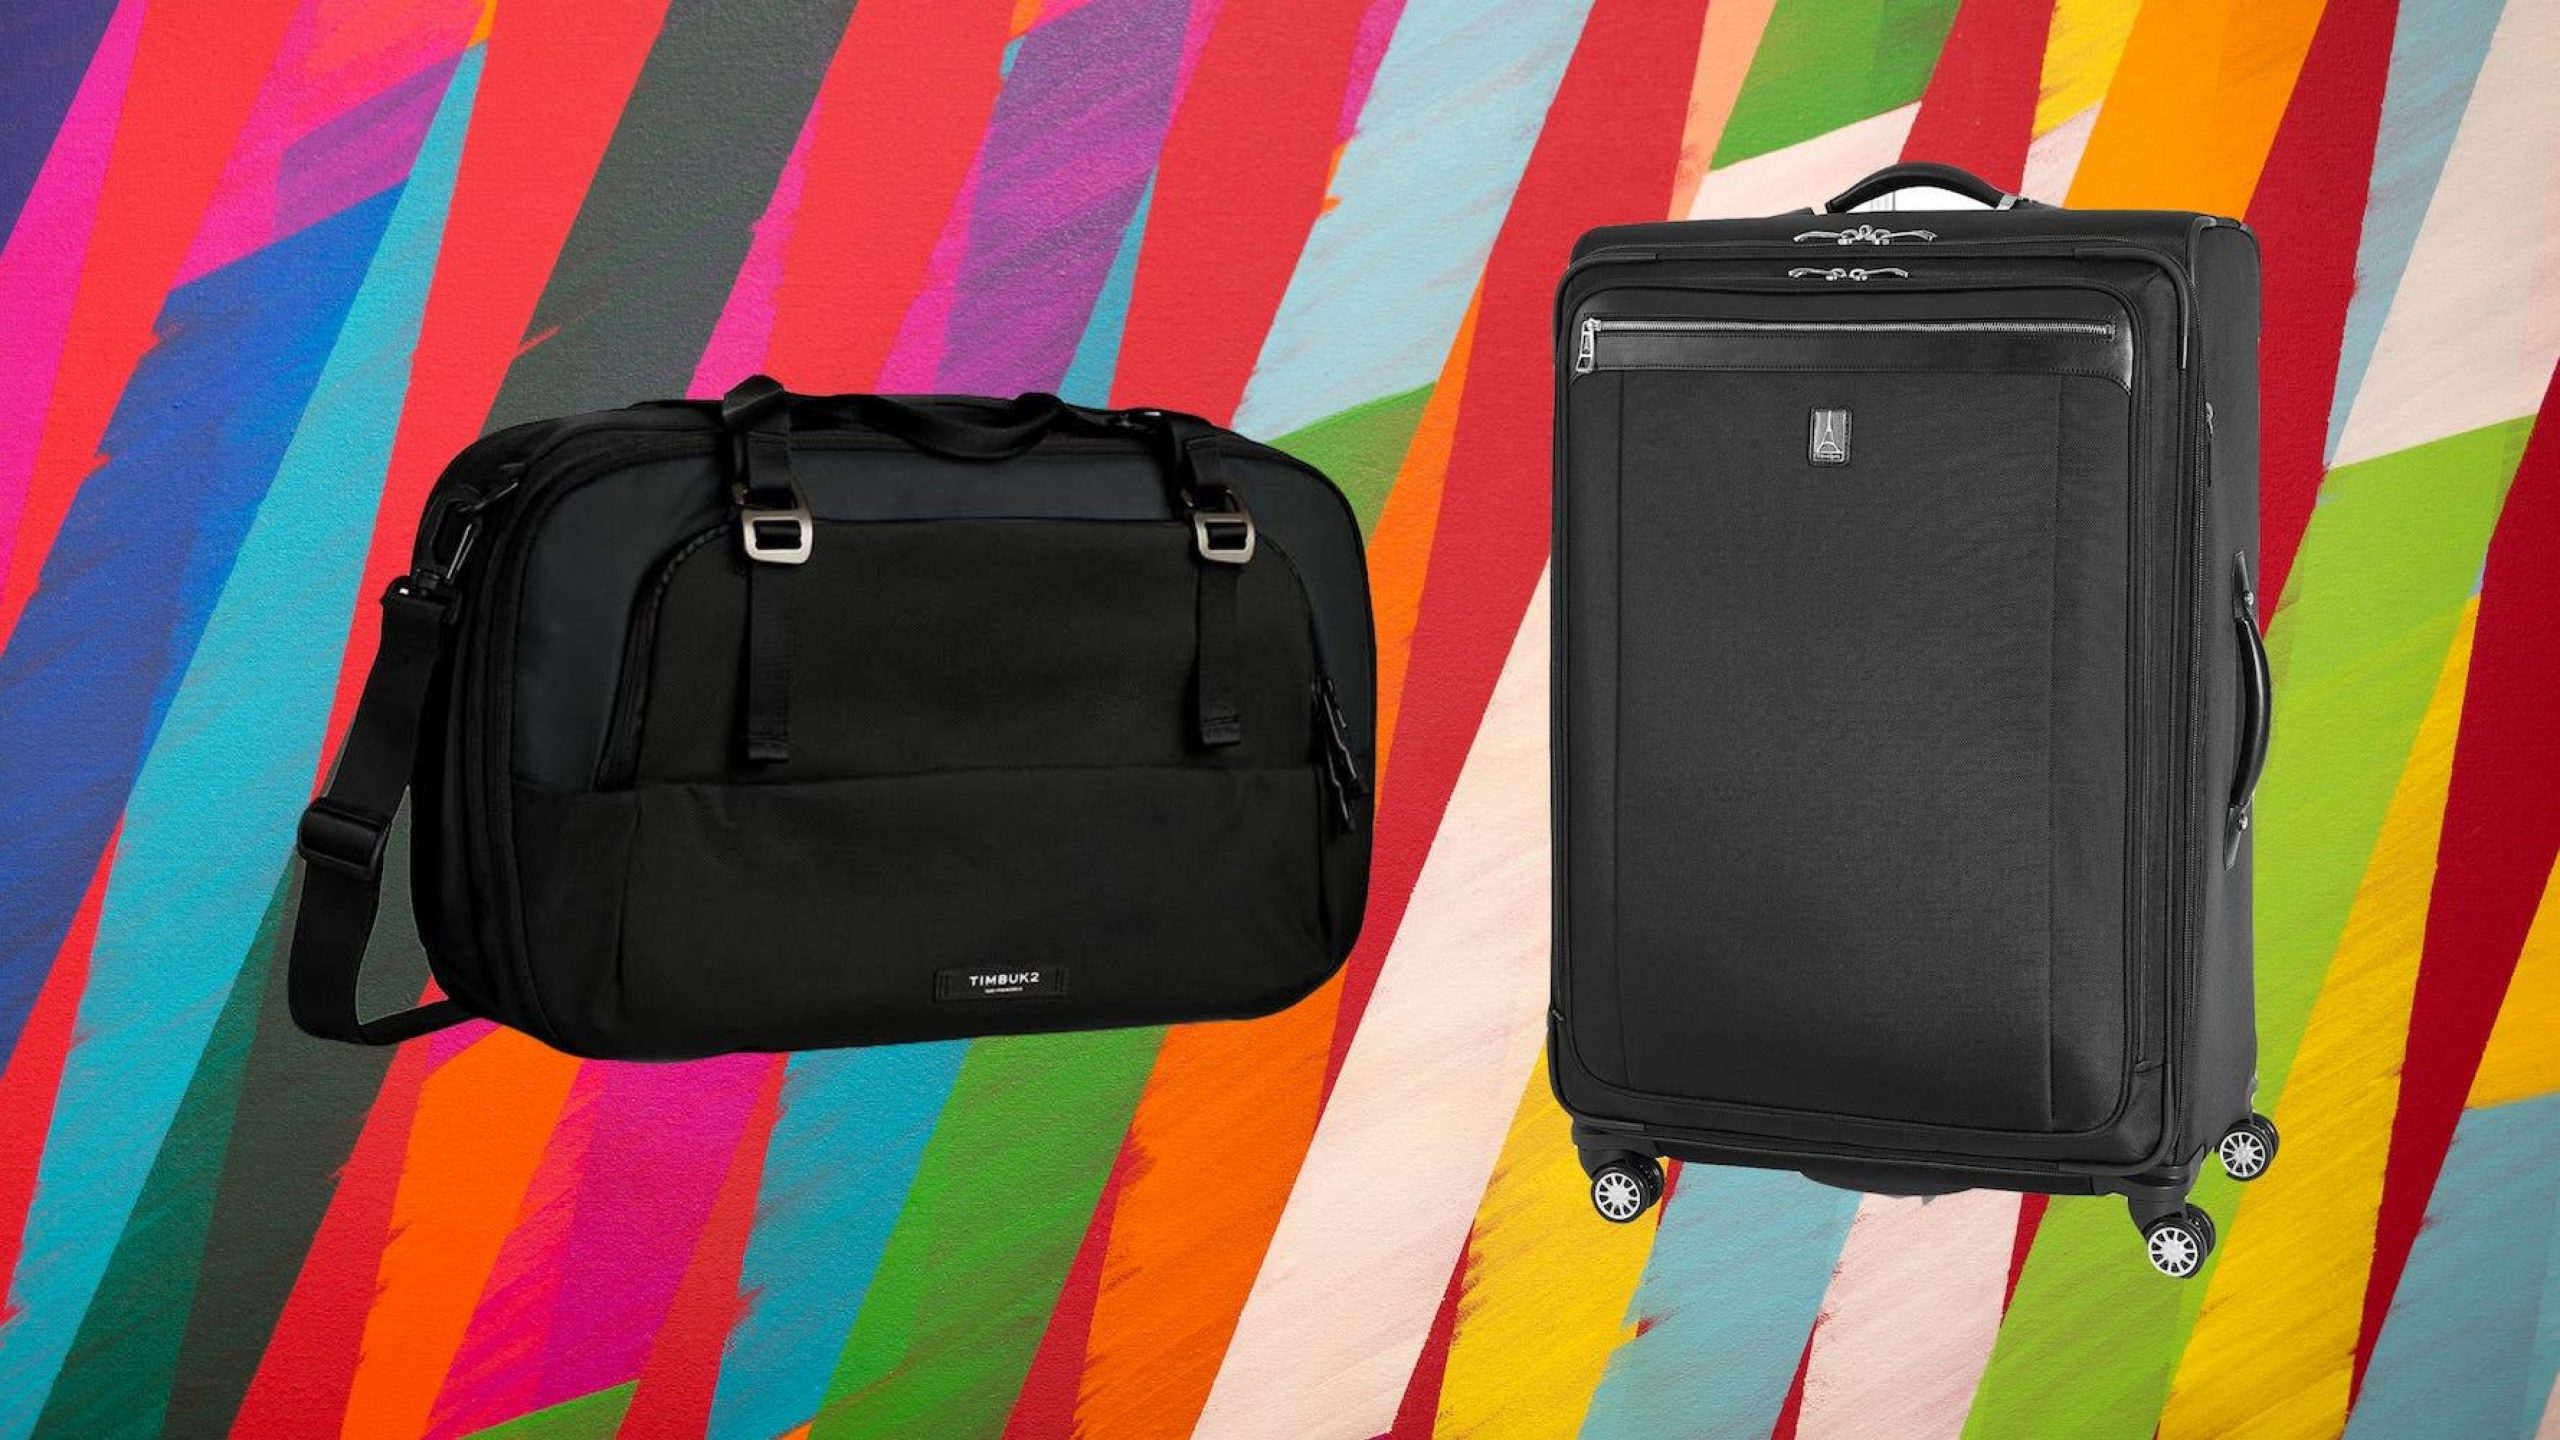 Get top-rated bags and luggage sets on sale at Macy’s, Amazon and more